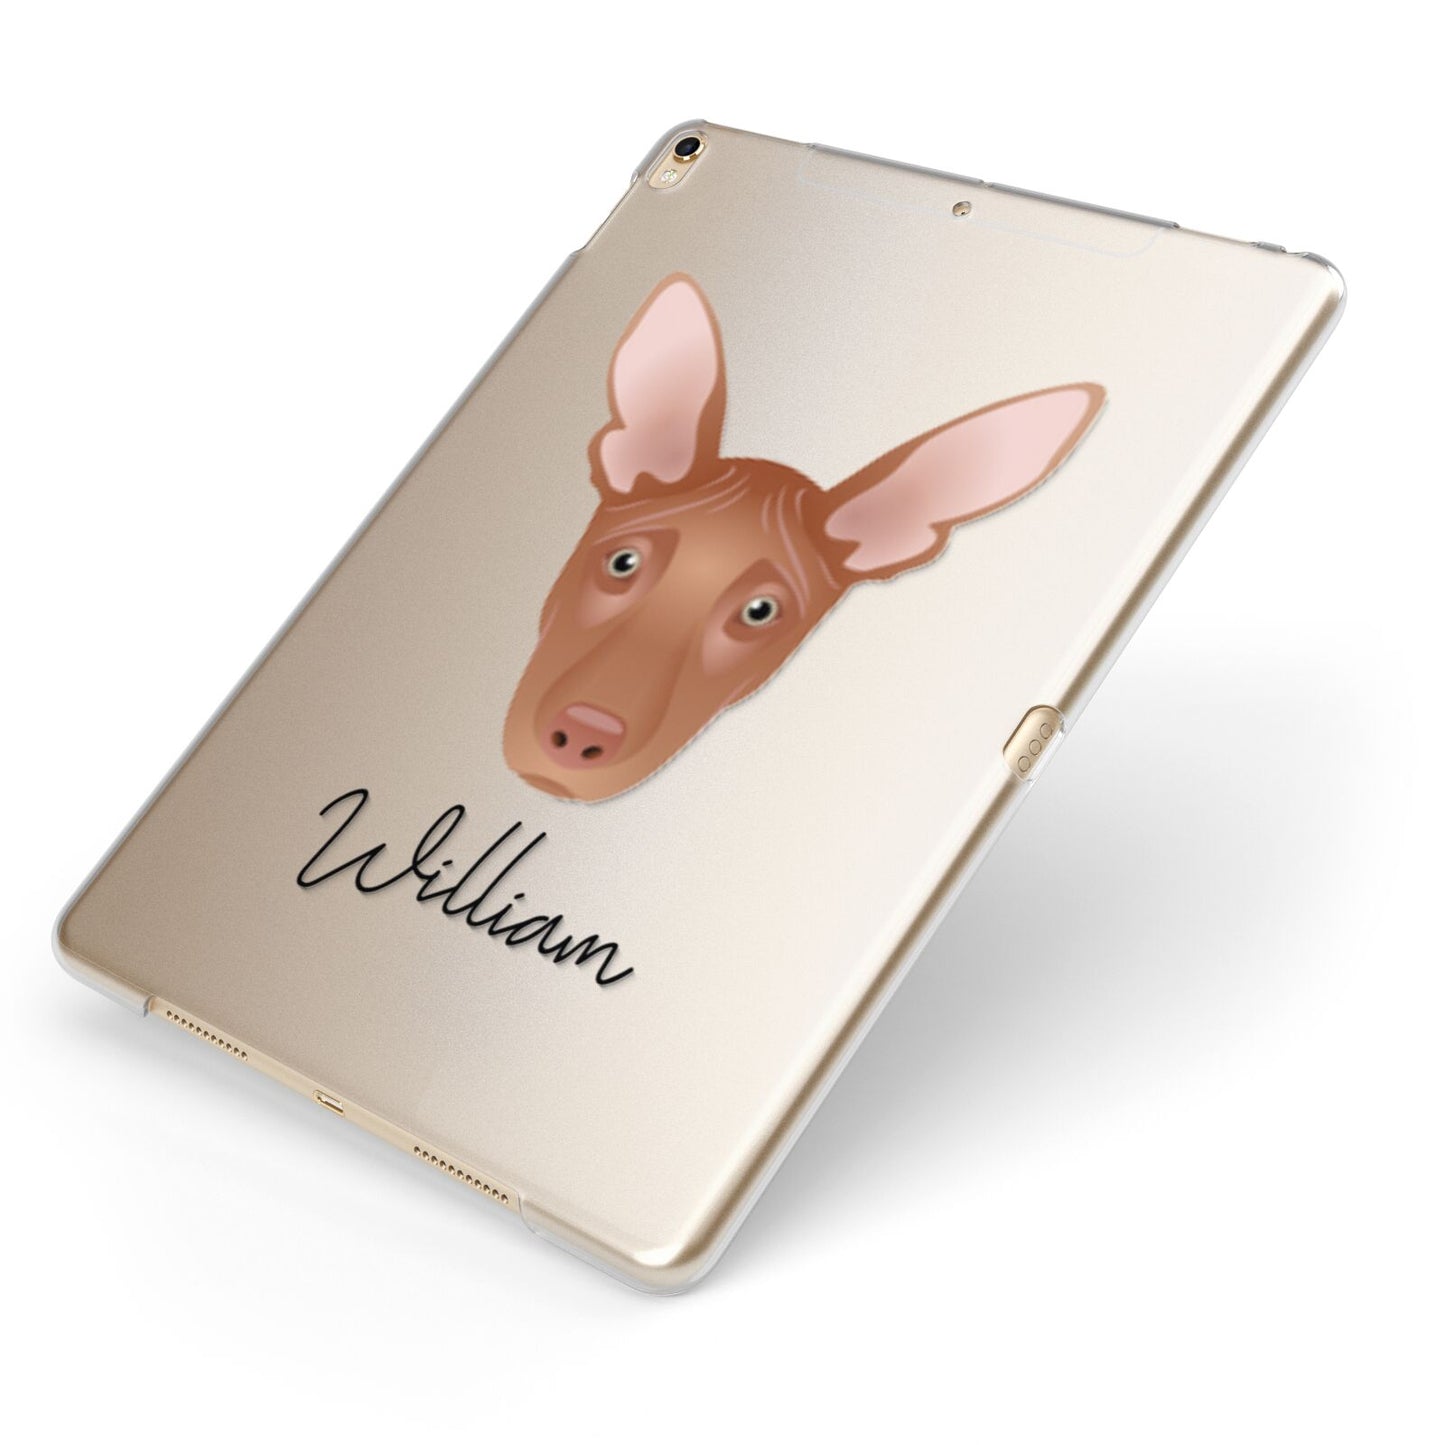 Pharaoh Hound Personalised Apple iPad Case on Gold iPad Side View